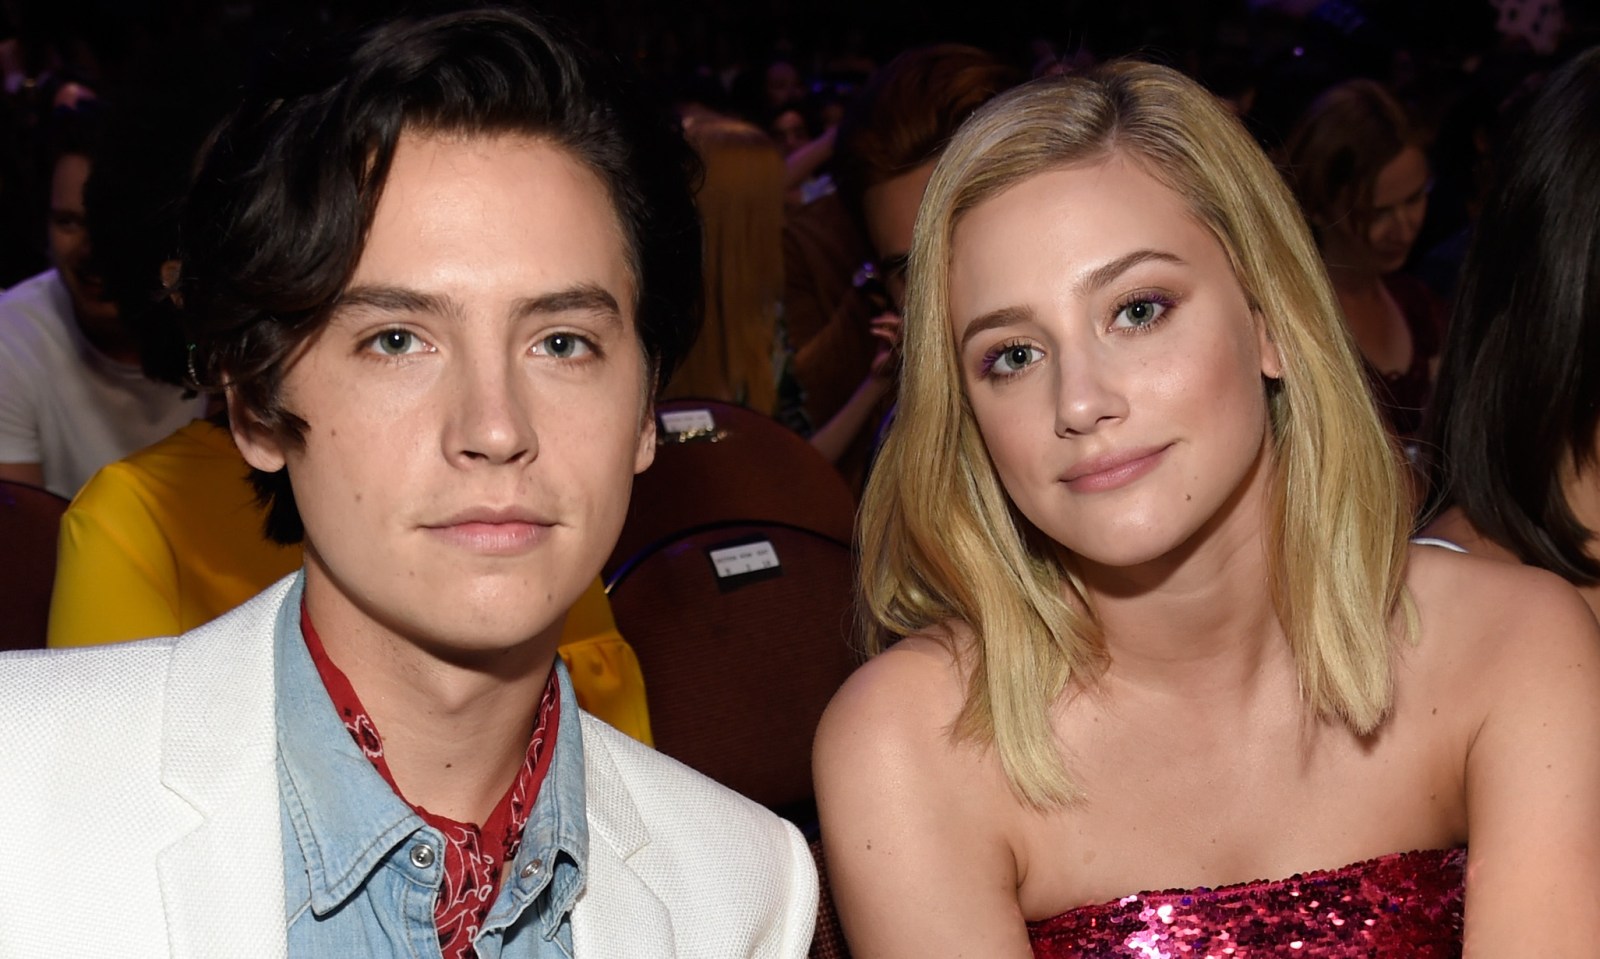 Lili Reinhart Cole Sprouse fake nude photo viral Twitter 